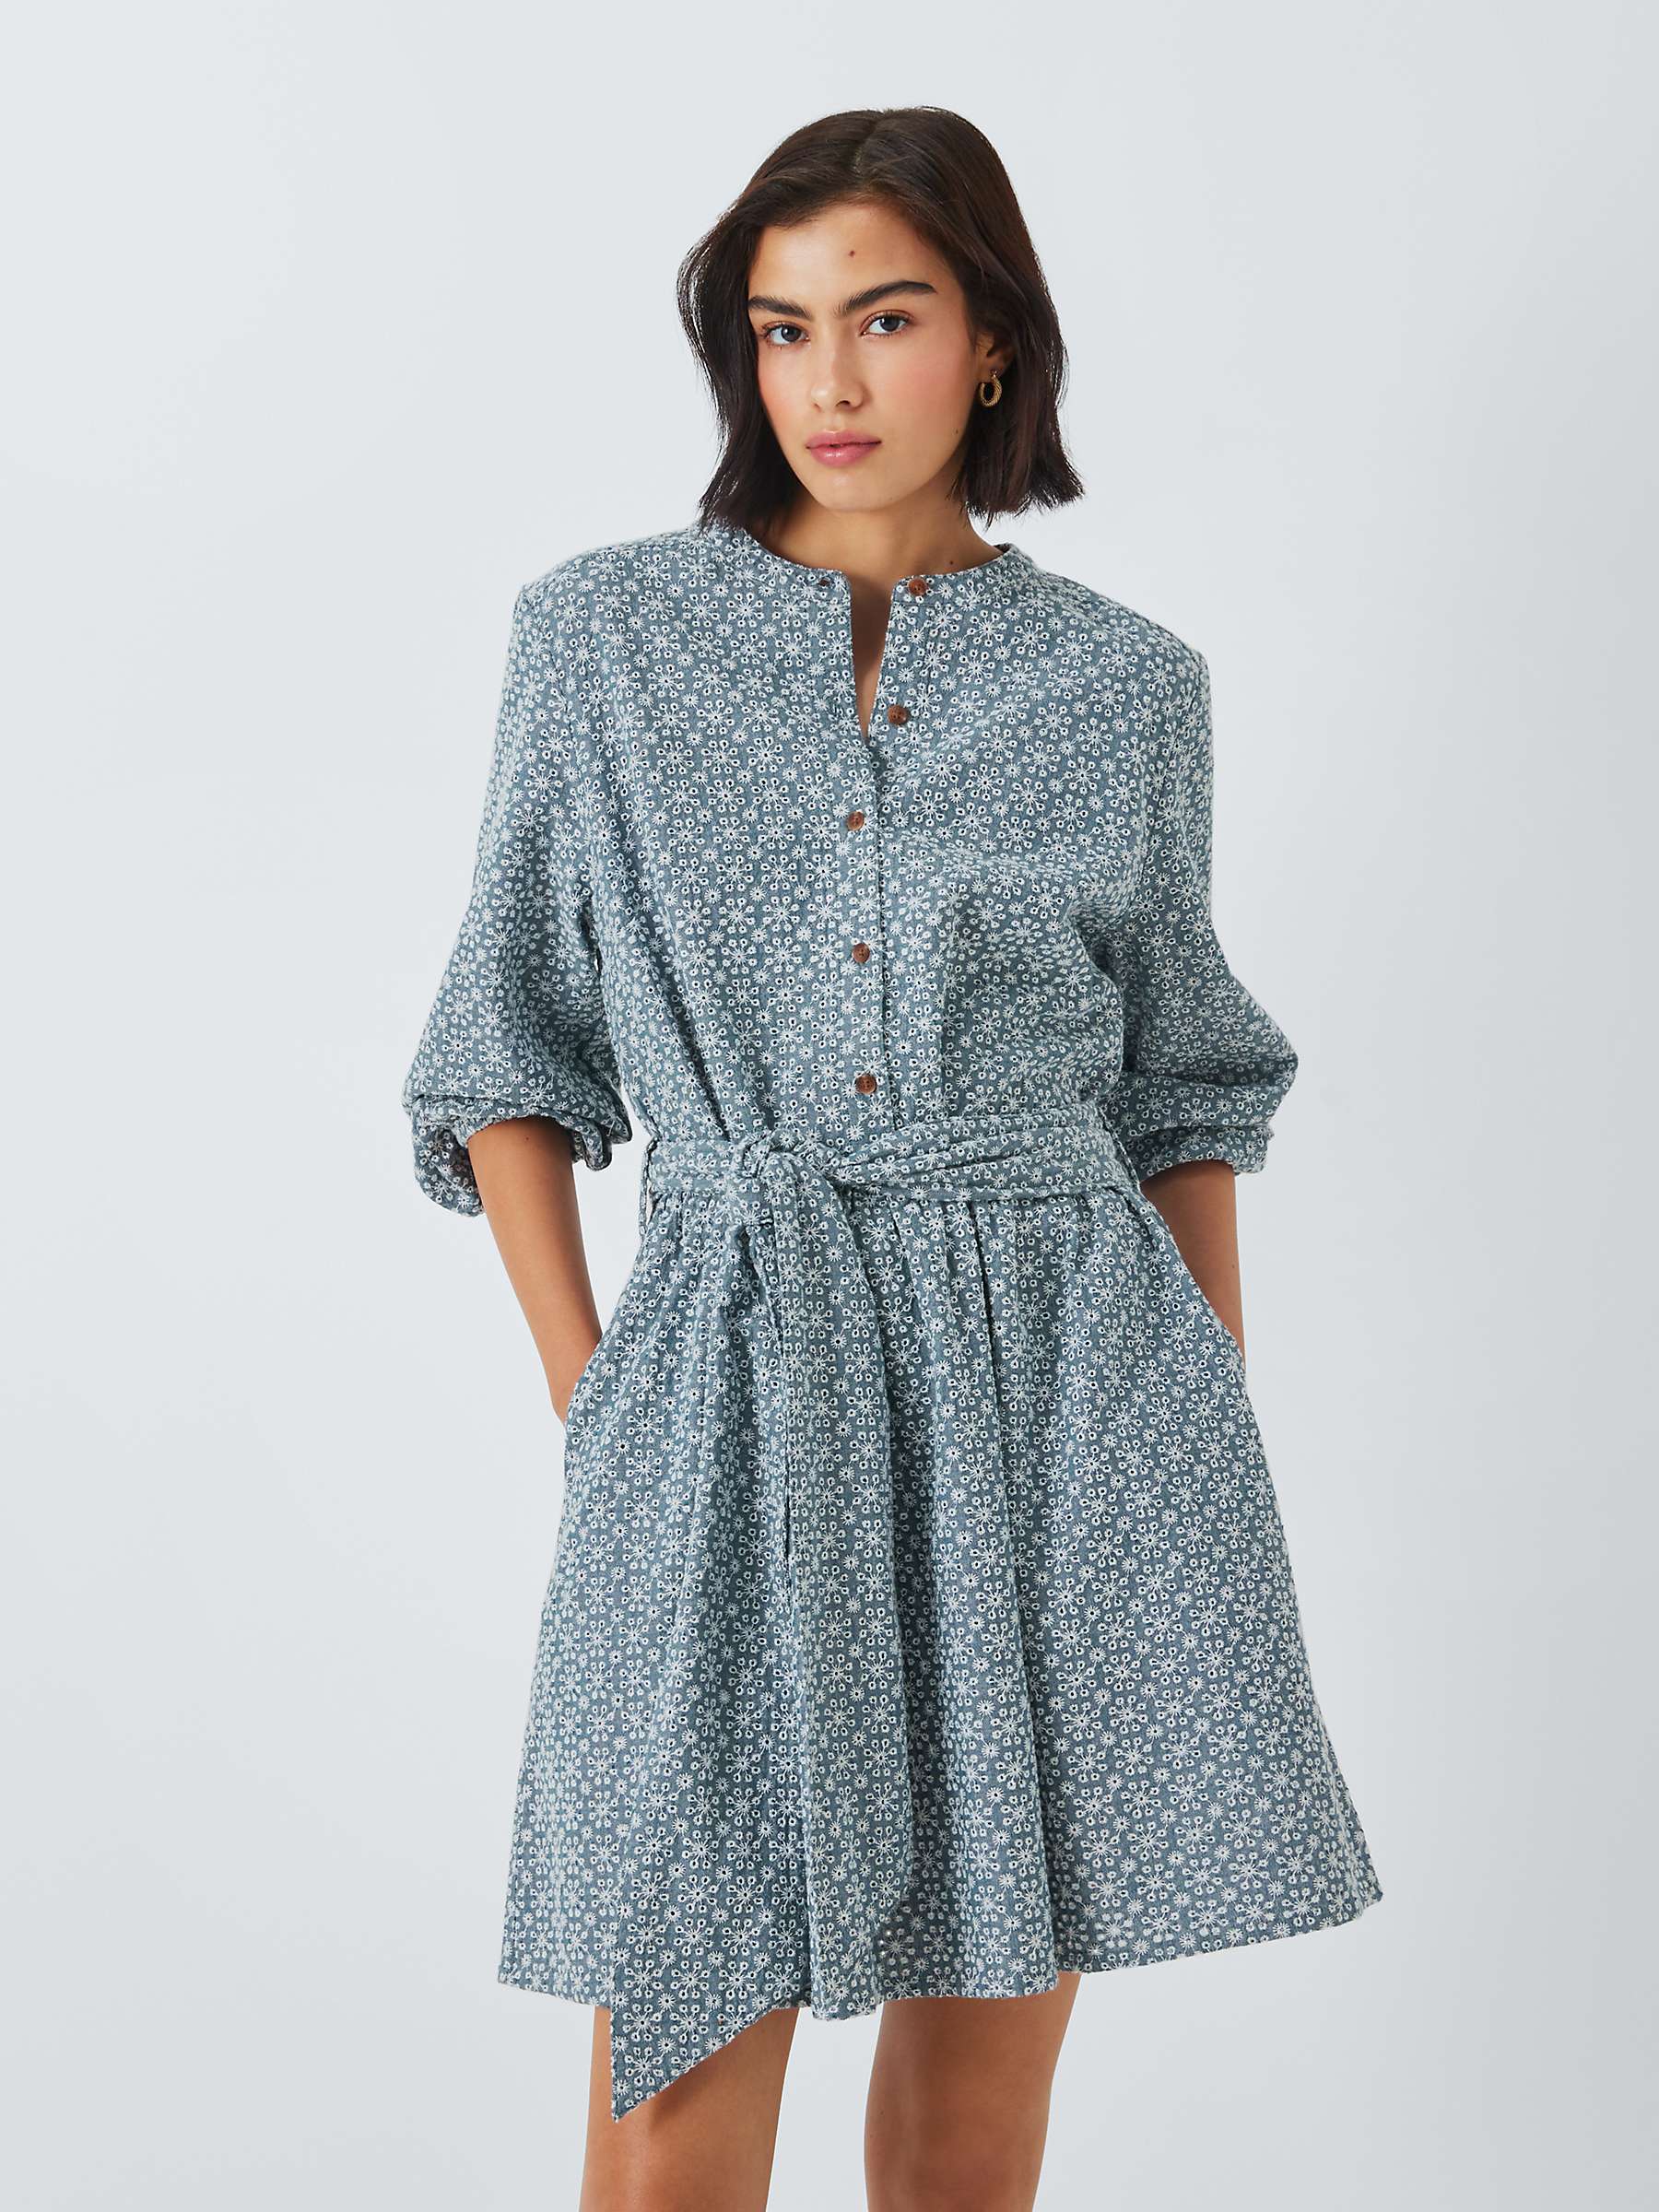 Buy Barbour Tomorrow's Archive Selma Broderie Anglaise Mini Dress, Indigo Online at johnlewis.com